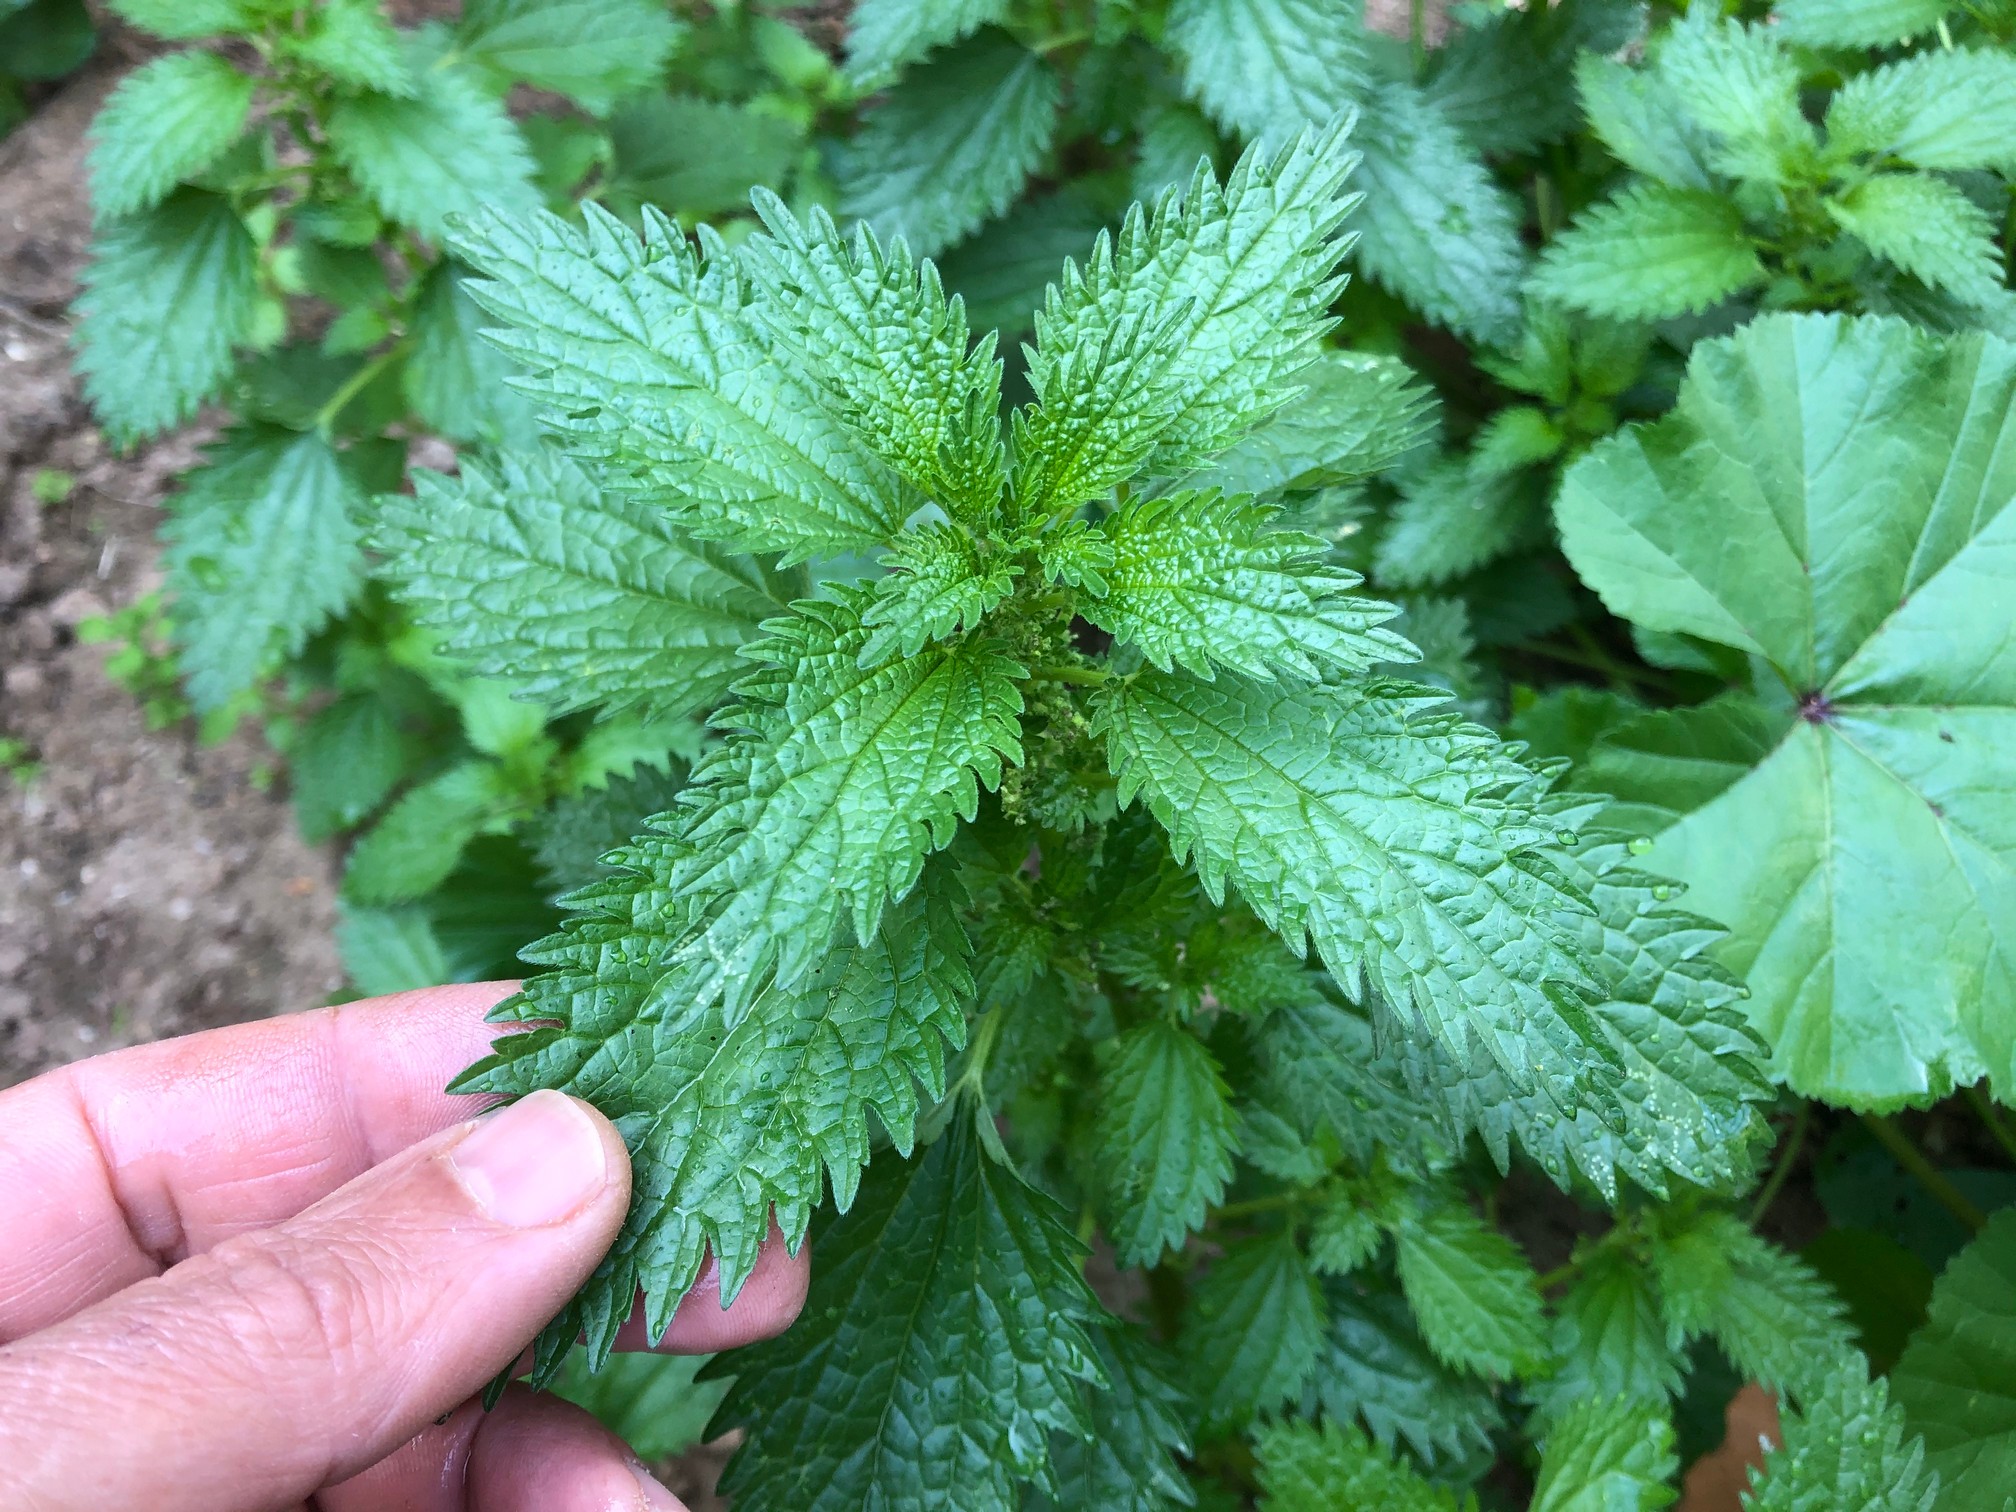 The amazing Health Benefits of Stinging Nettle are so many. All parts of the nettle plant can be used for different applications. Stinging nettle has a range of uses, it's an effective remedy with many uses